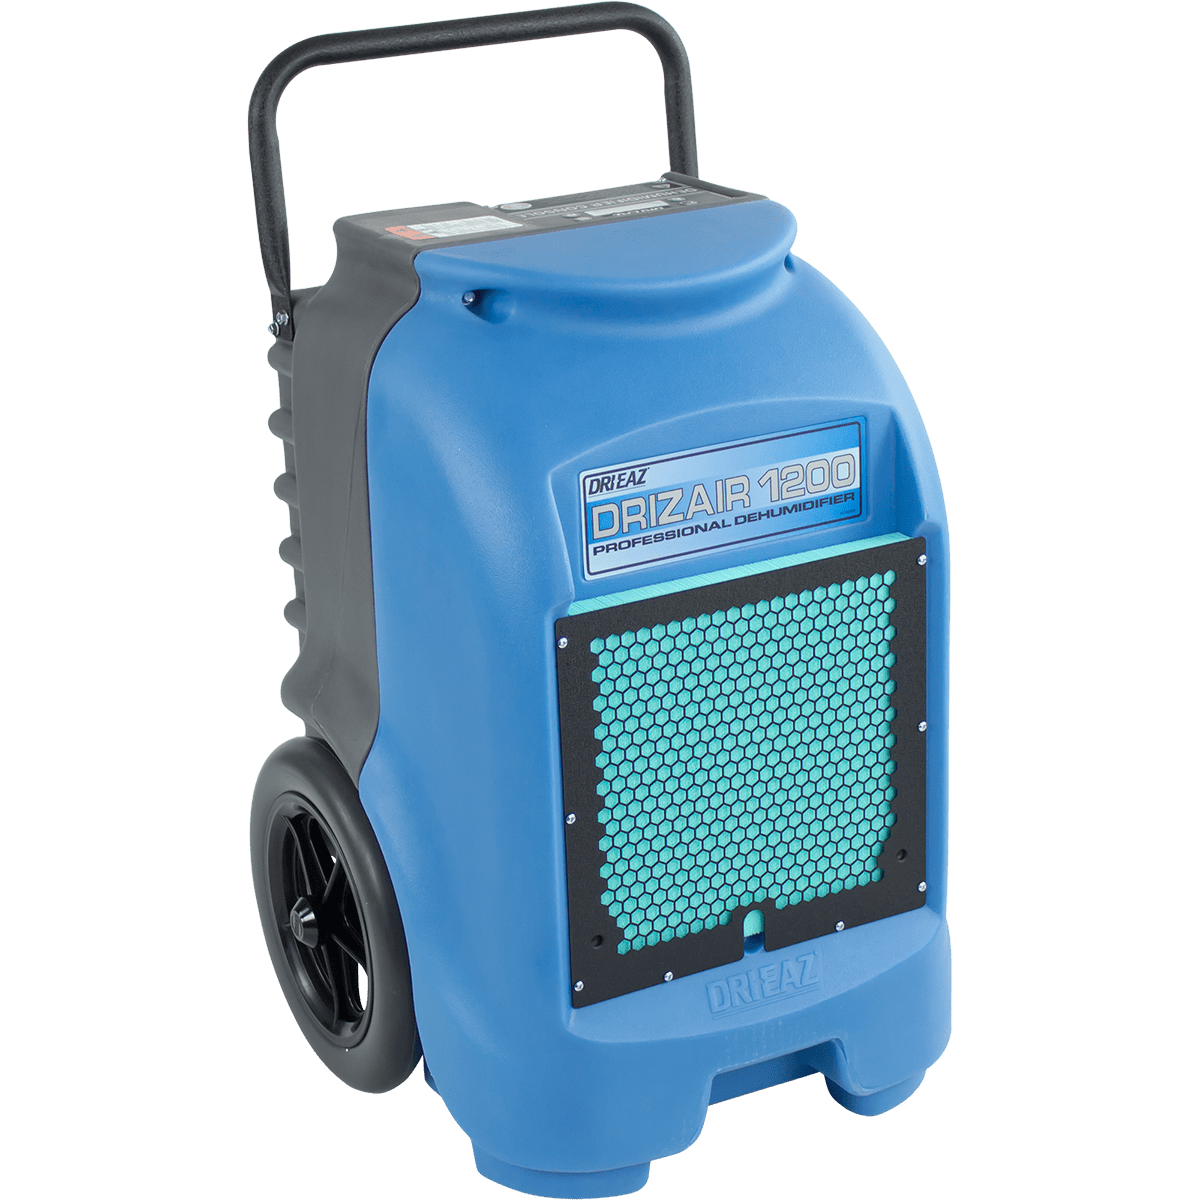 Best commercial dehumidifiers for basements